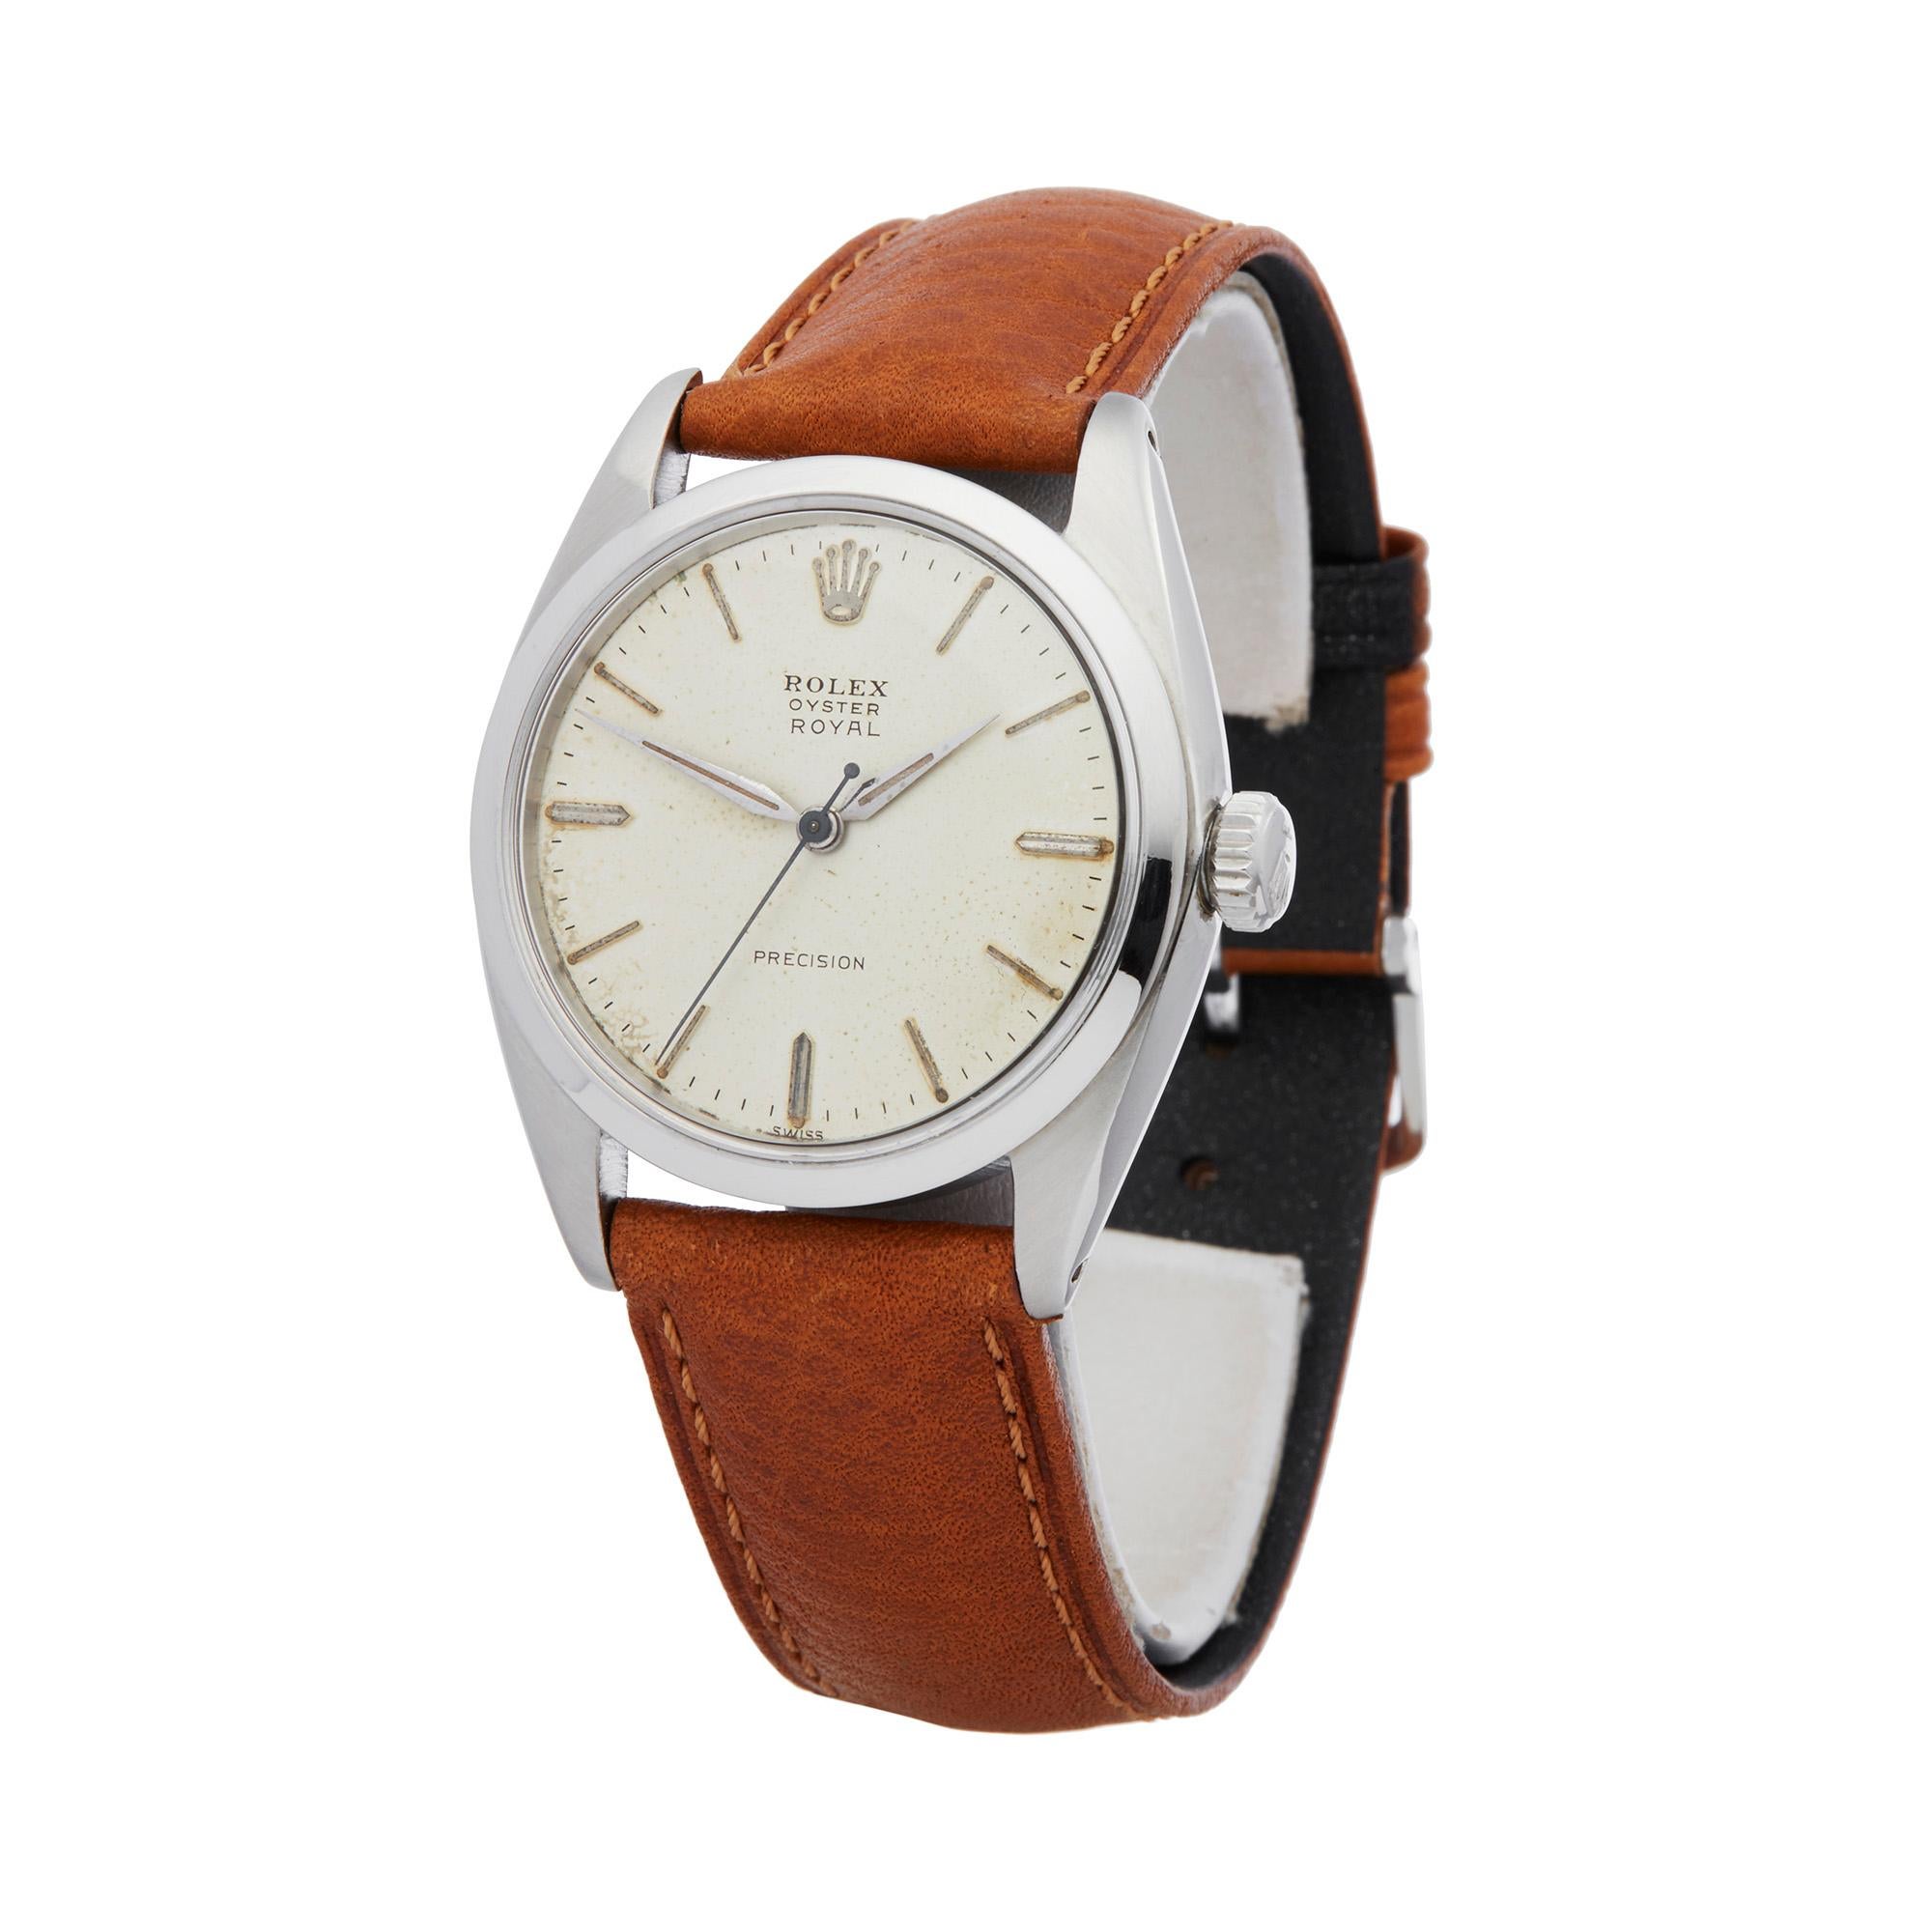 Reference: COM1889
Manufacturer: Rolex
Model: Oyster Royal
Model Reference: 6426
Age: Circa 1960's
Gender: Men's
Box and Papers: Box Only
Dial: White Baton
Glass: Sapphire Crystal
Movement: Mechanical Wind
Water Resistance: Not Recommended for Use